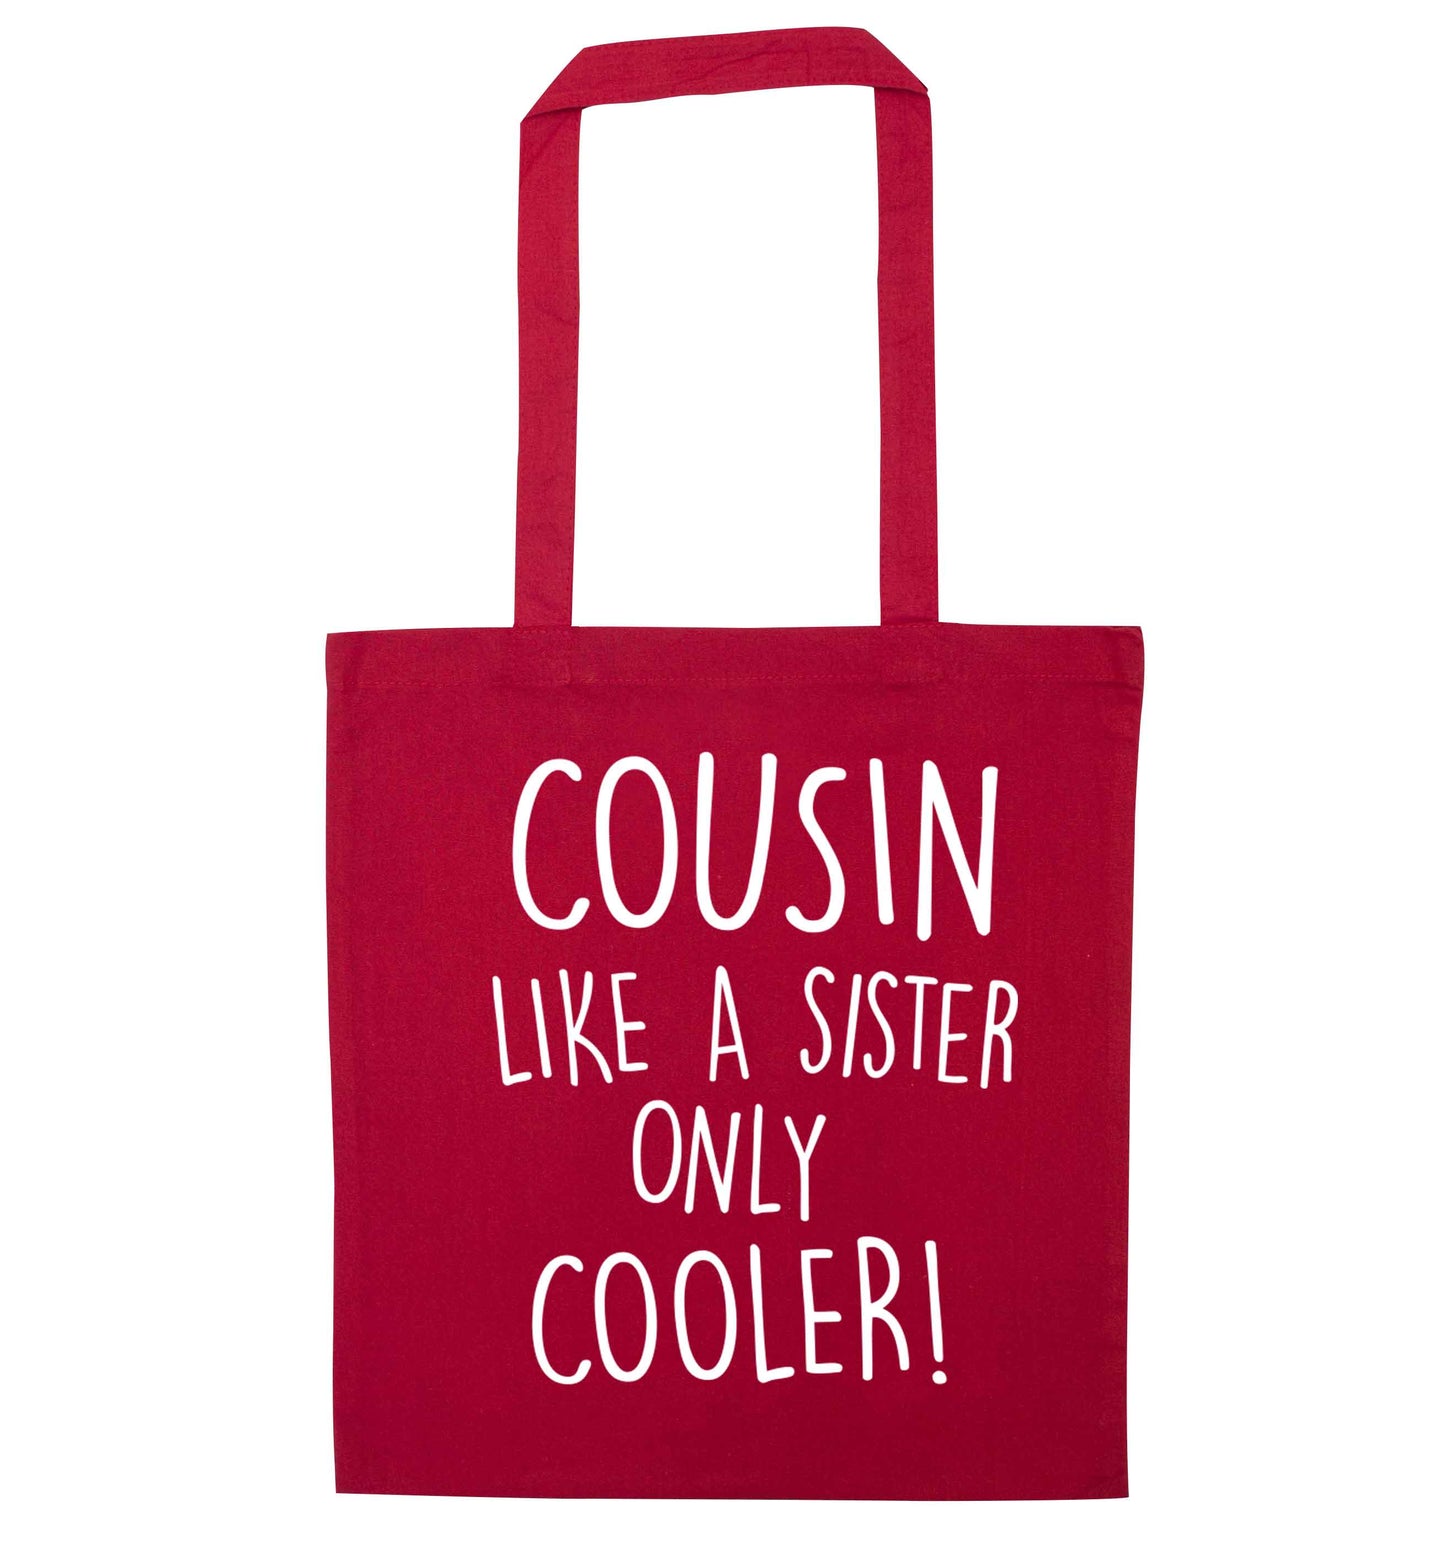 Cousin like a sister only cooler red tote bag